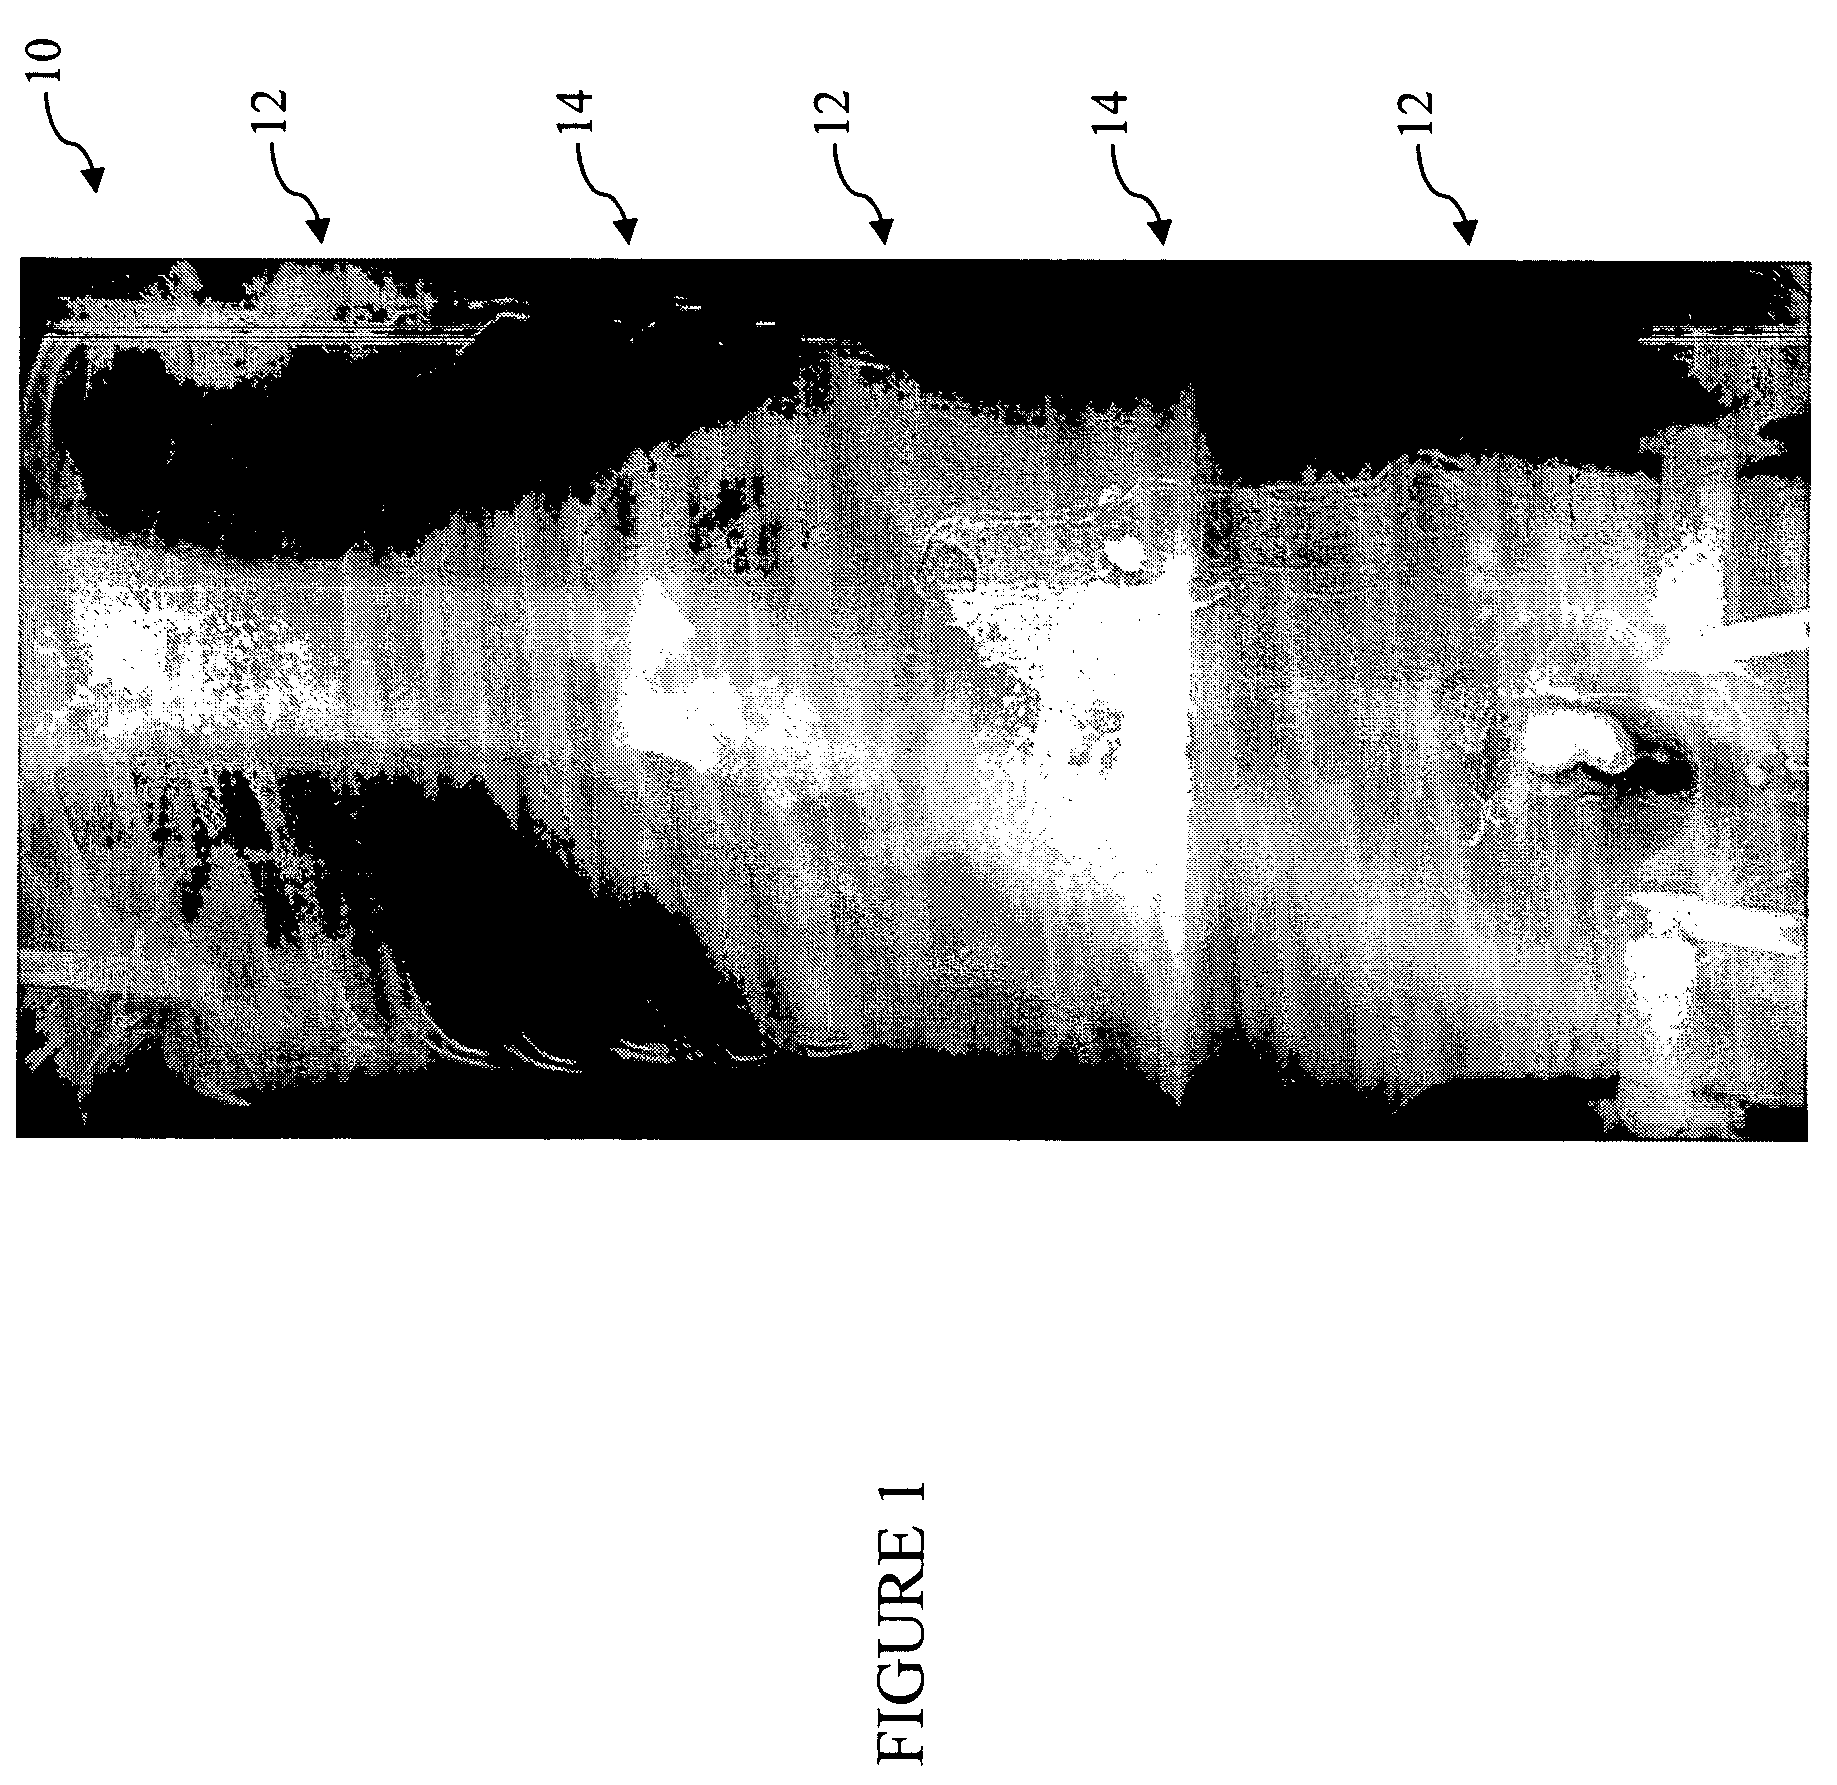 Enhanced image processing method for the presentation of digitally-combined medical images